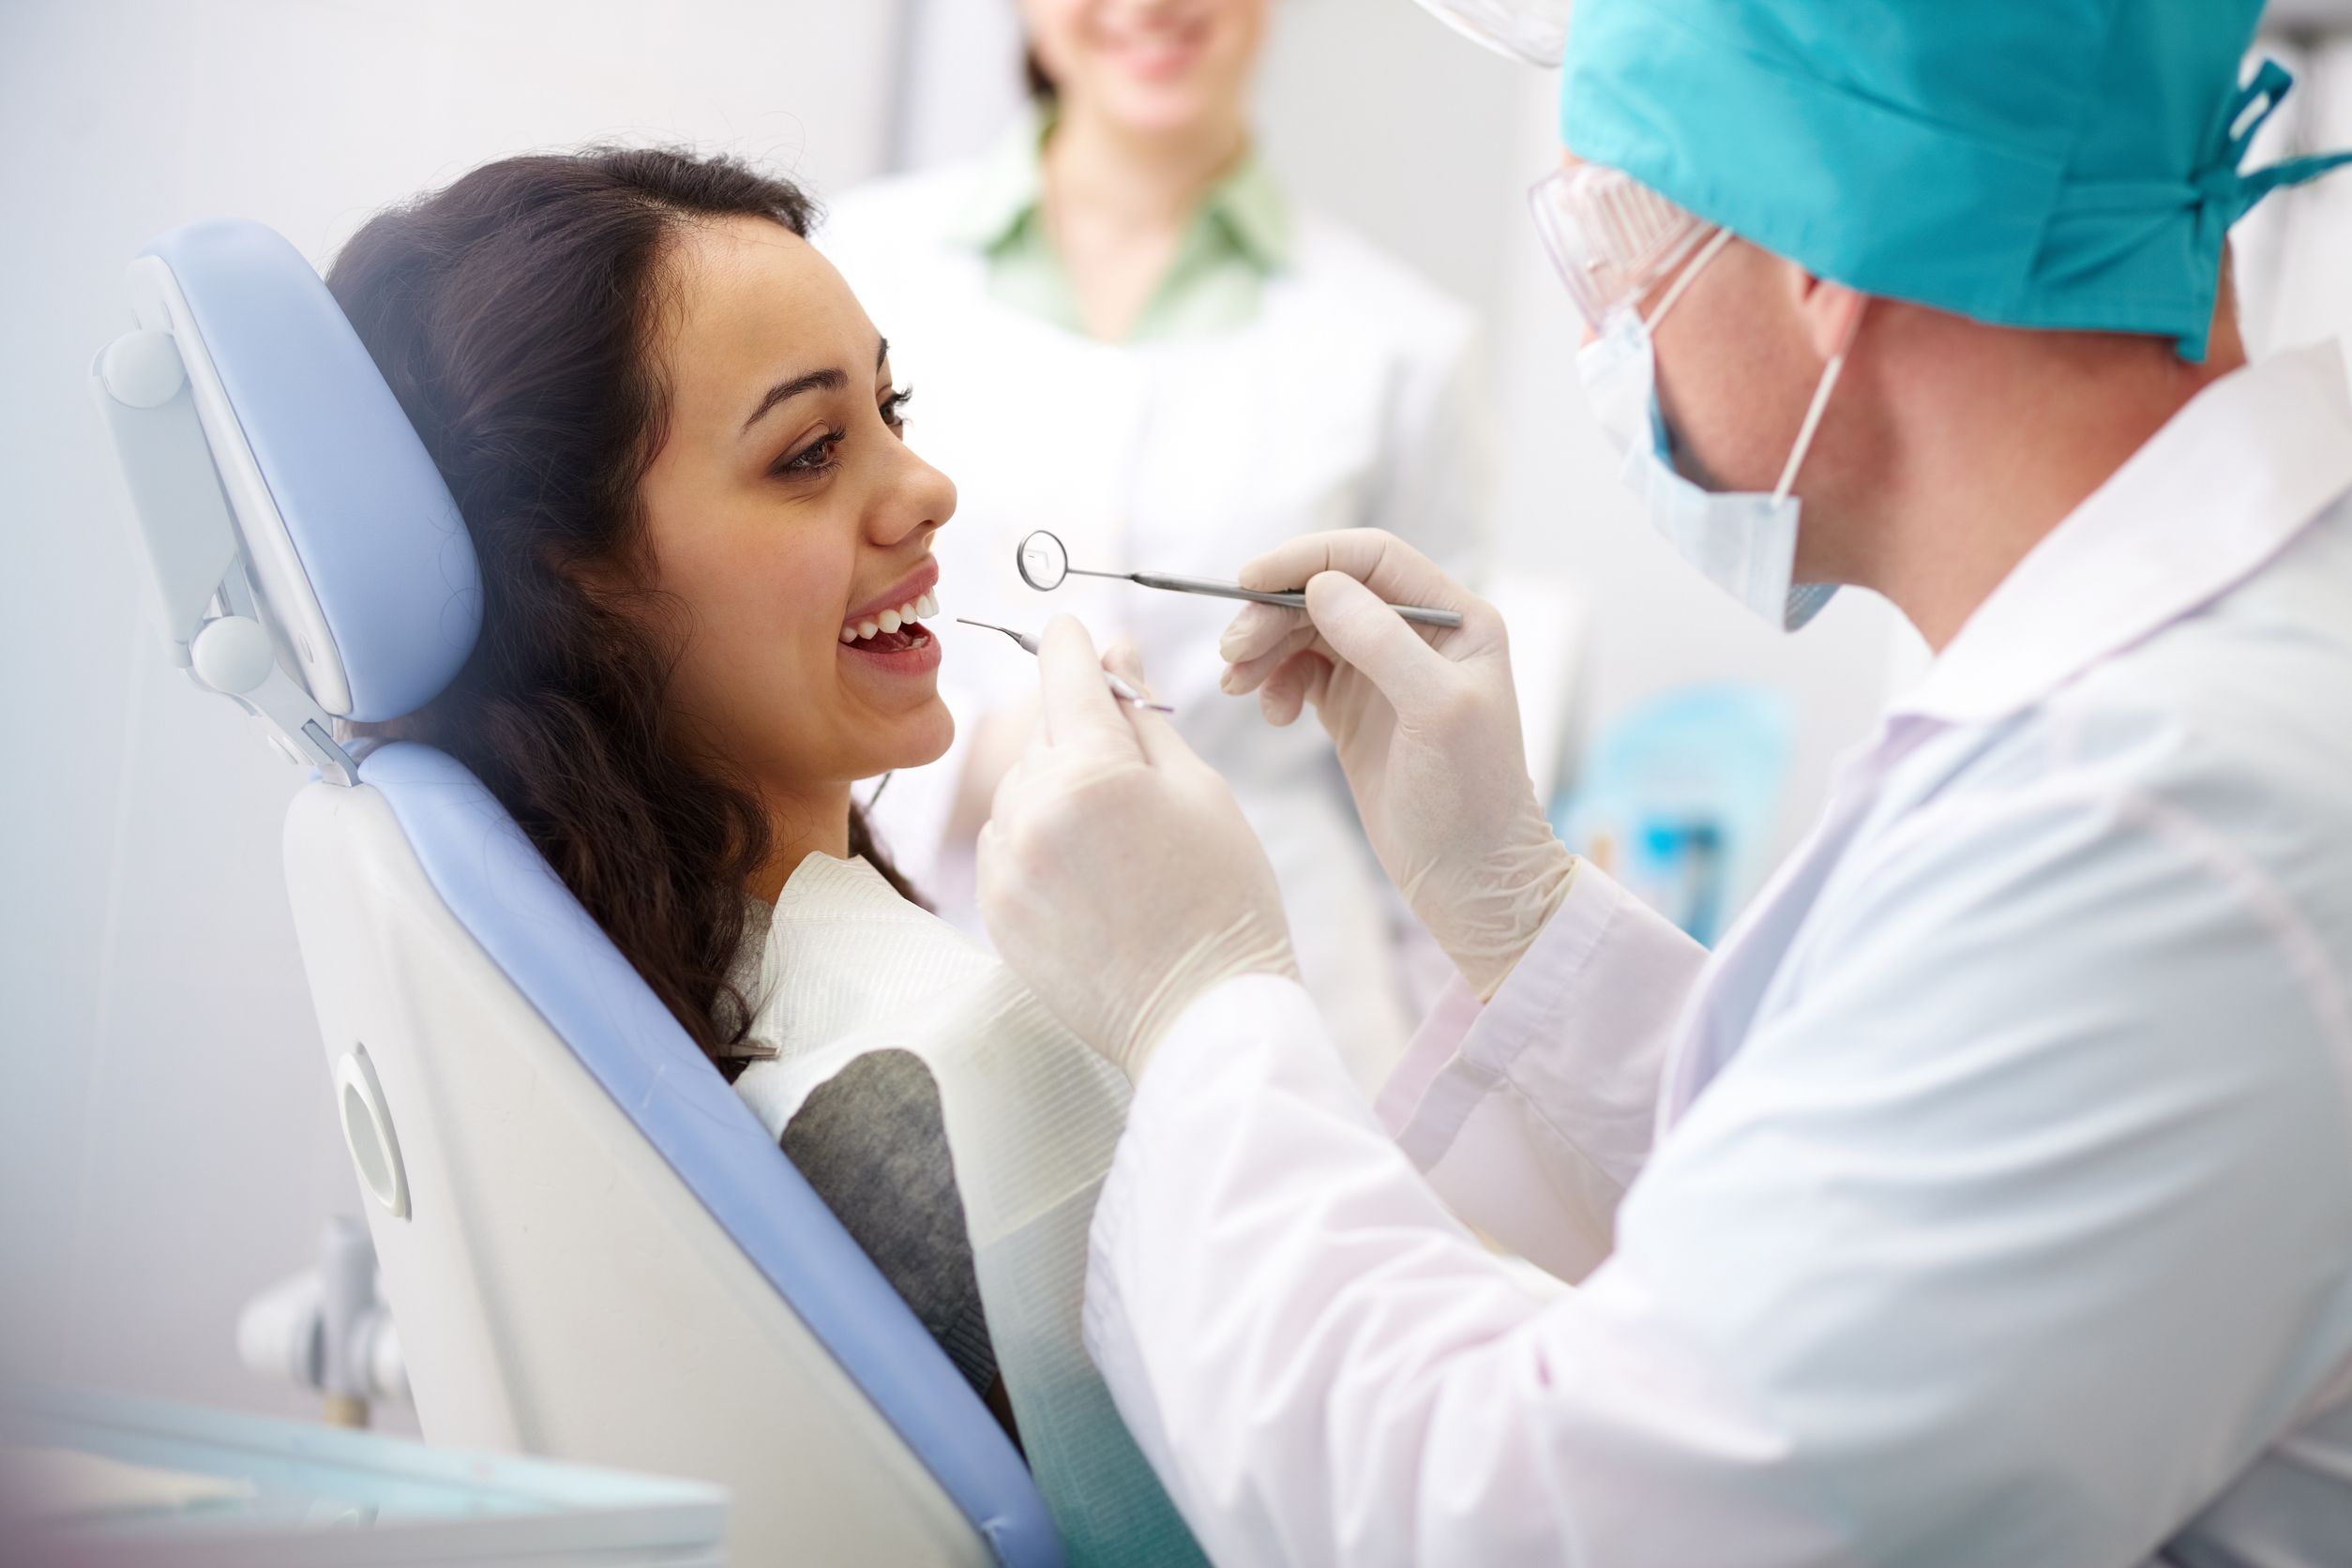 Your Family Dentist in Naperville Can Ensure Your Family’s Oral Health